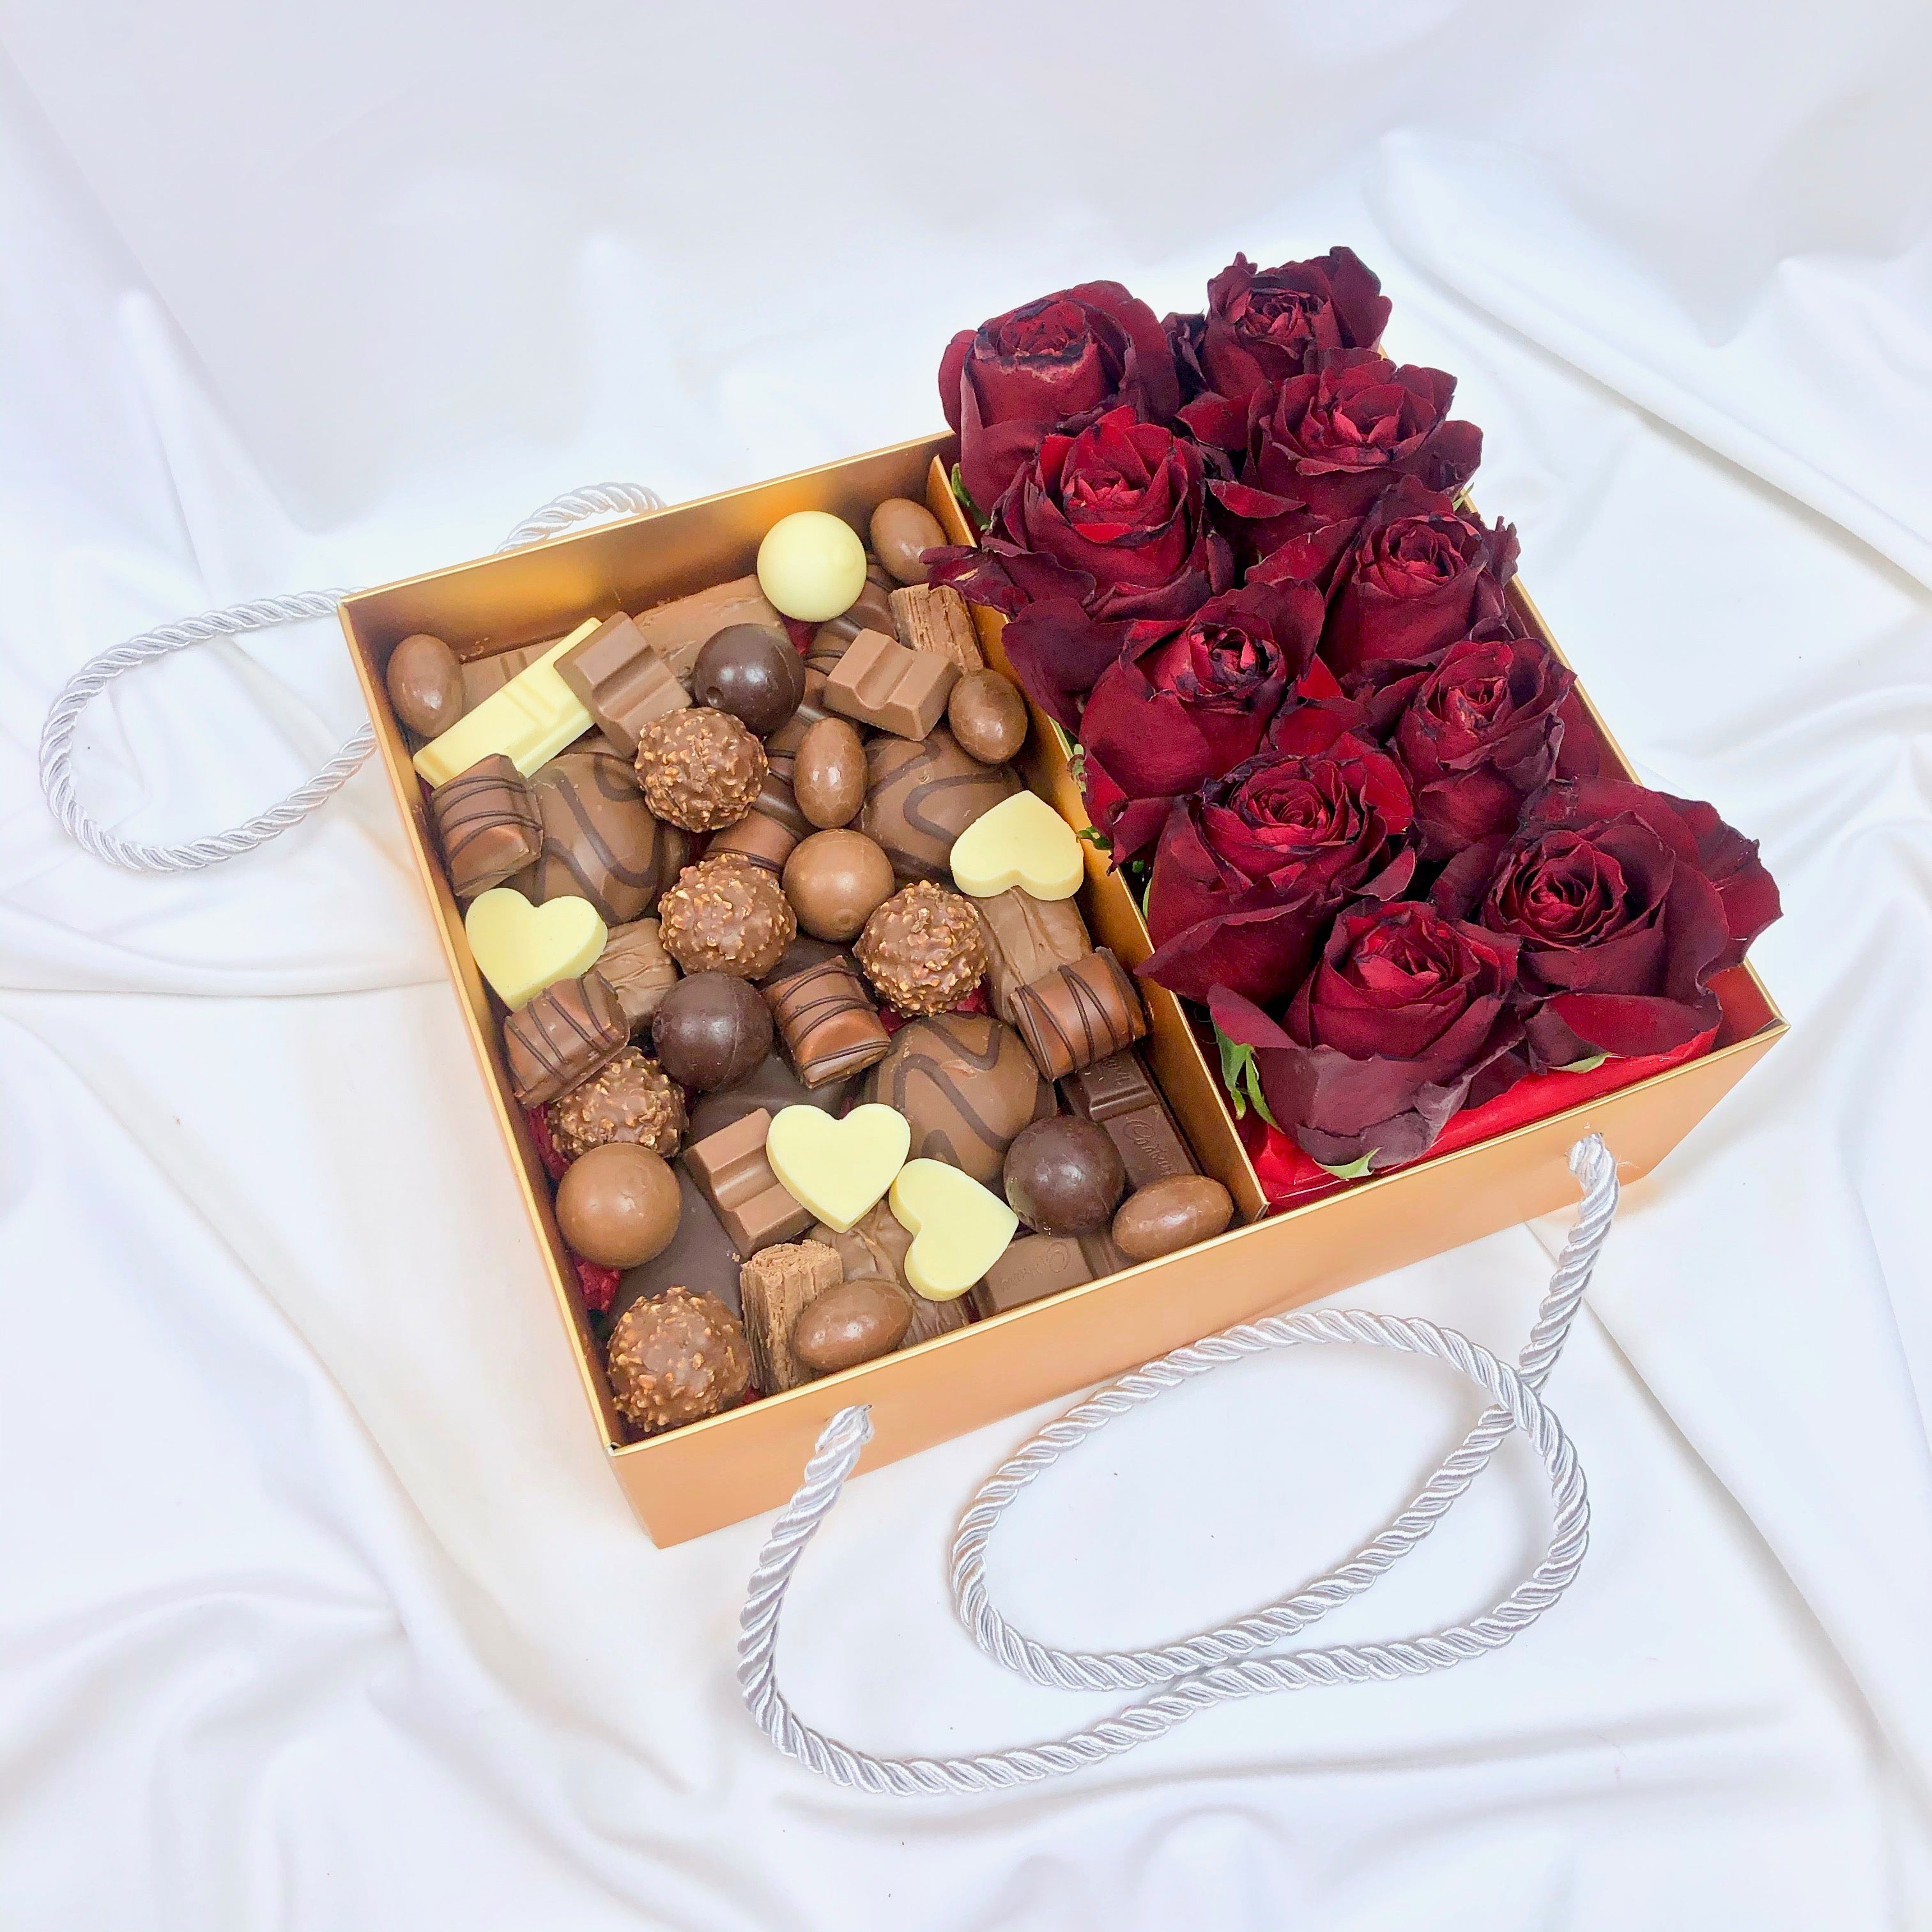 Chocolate Assortment & Roses Gift Hamper roses and chocolates Delivery Adelaide